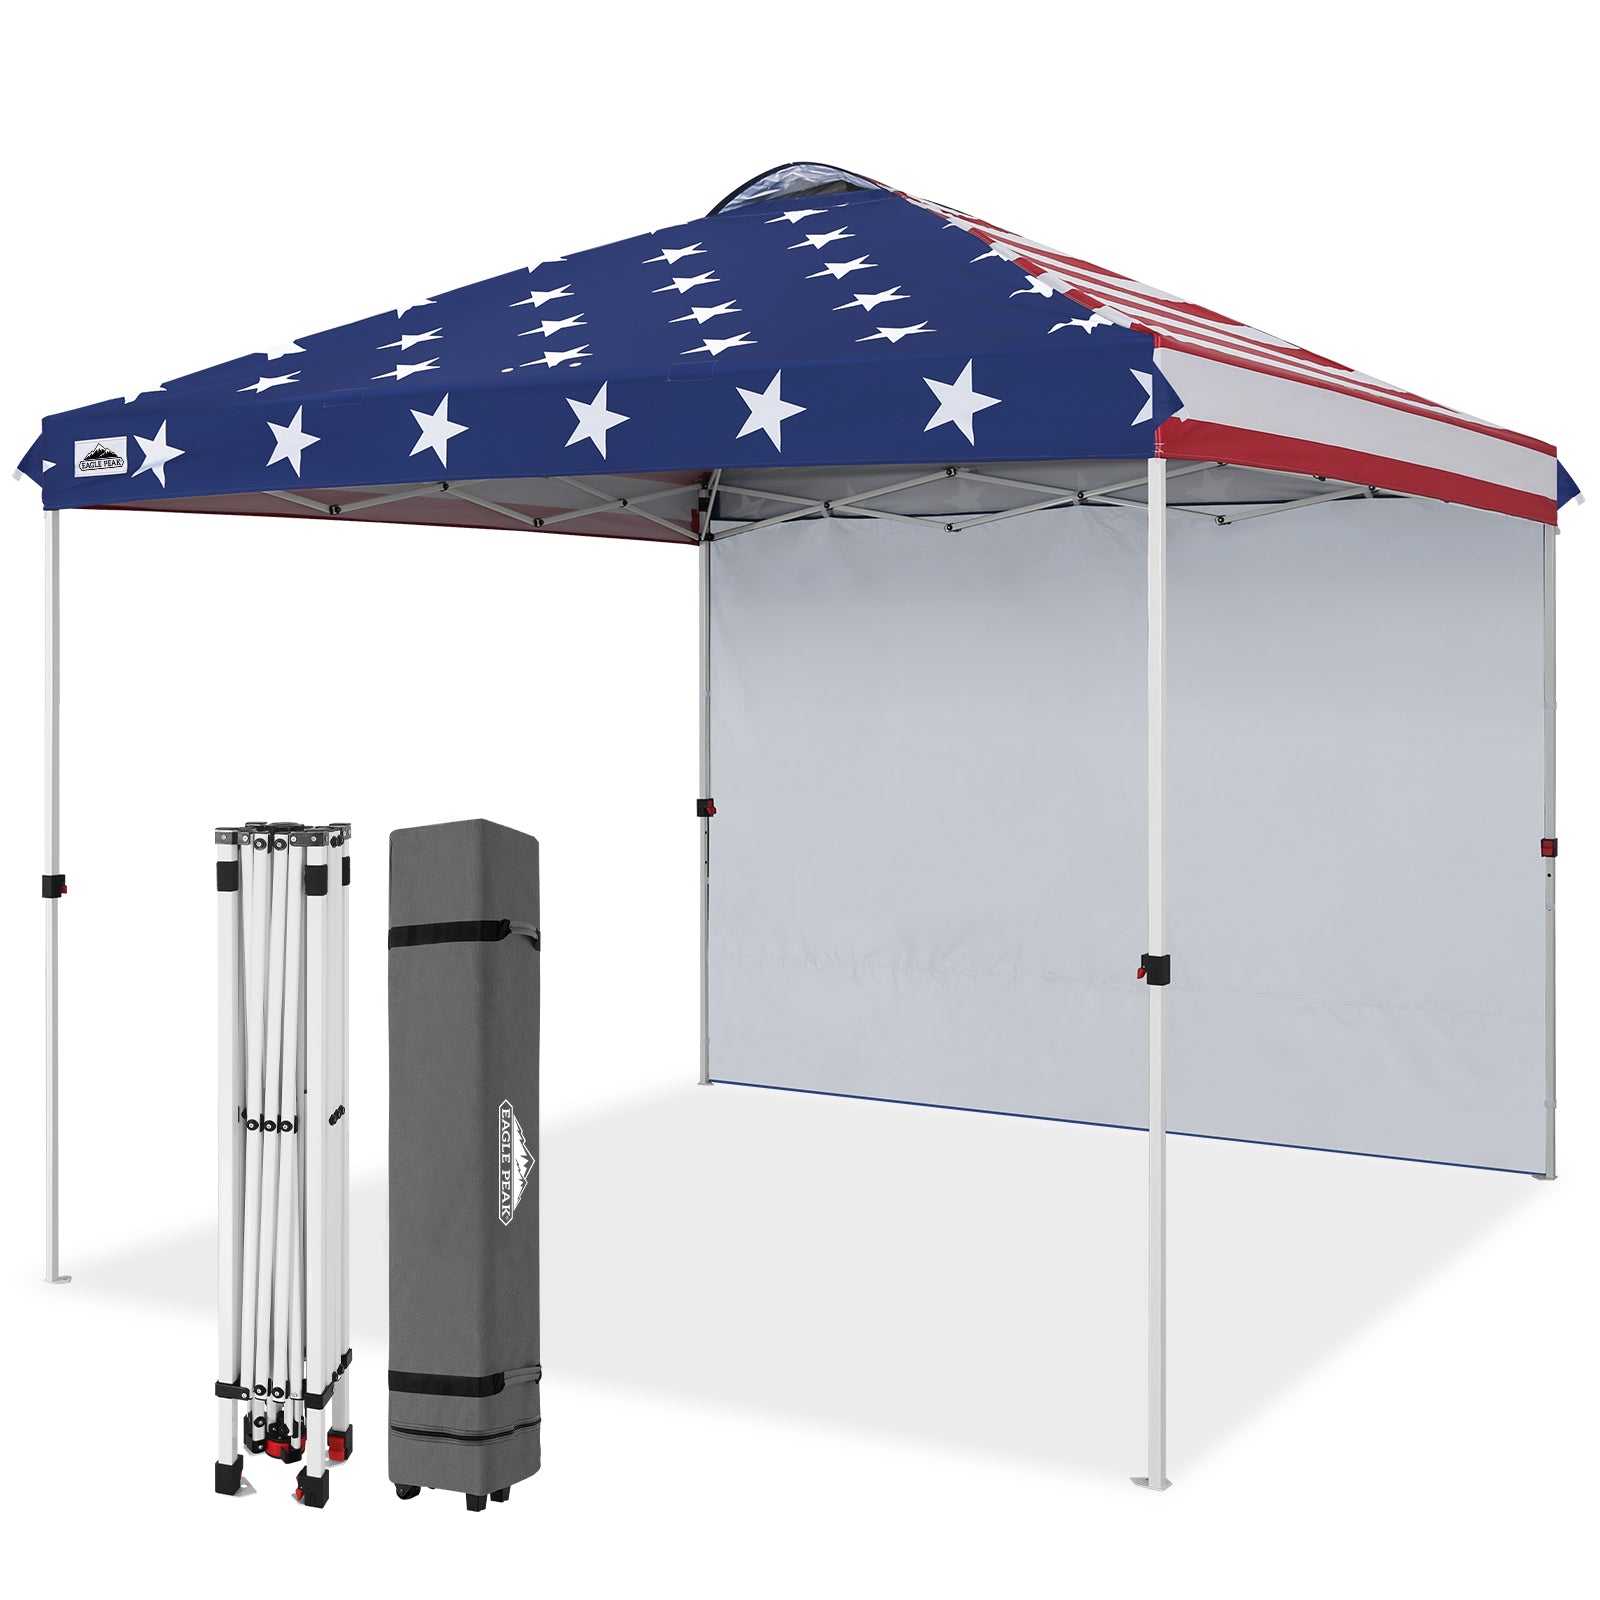 EAGLE 10x10 Pop up Canopy Tent with One Sid